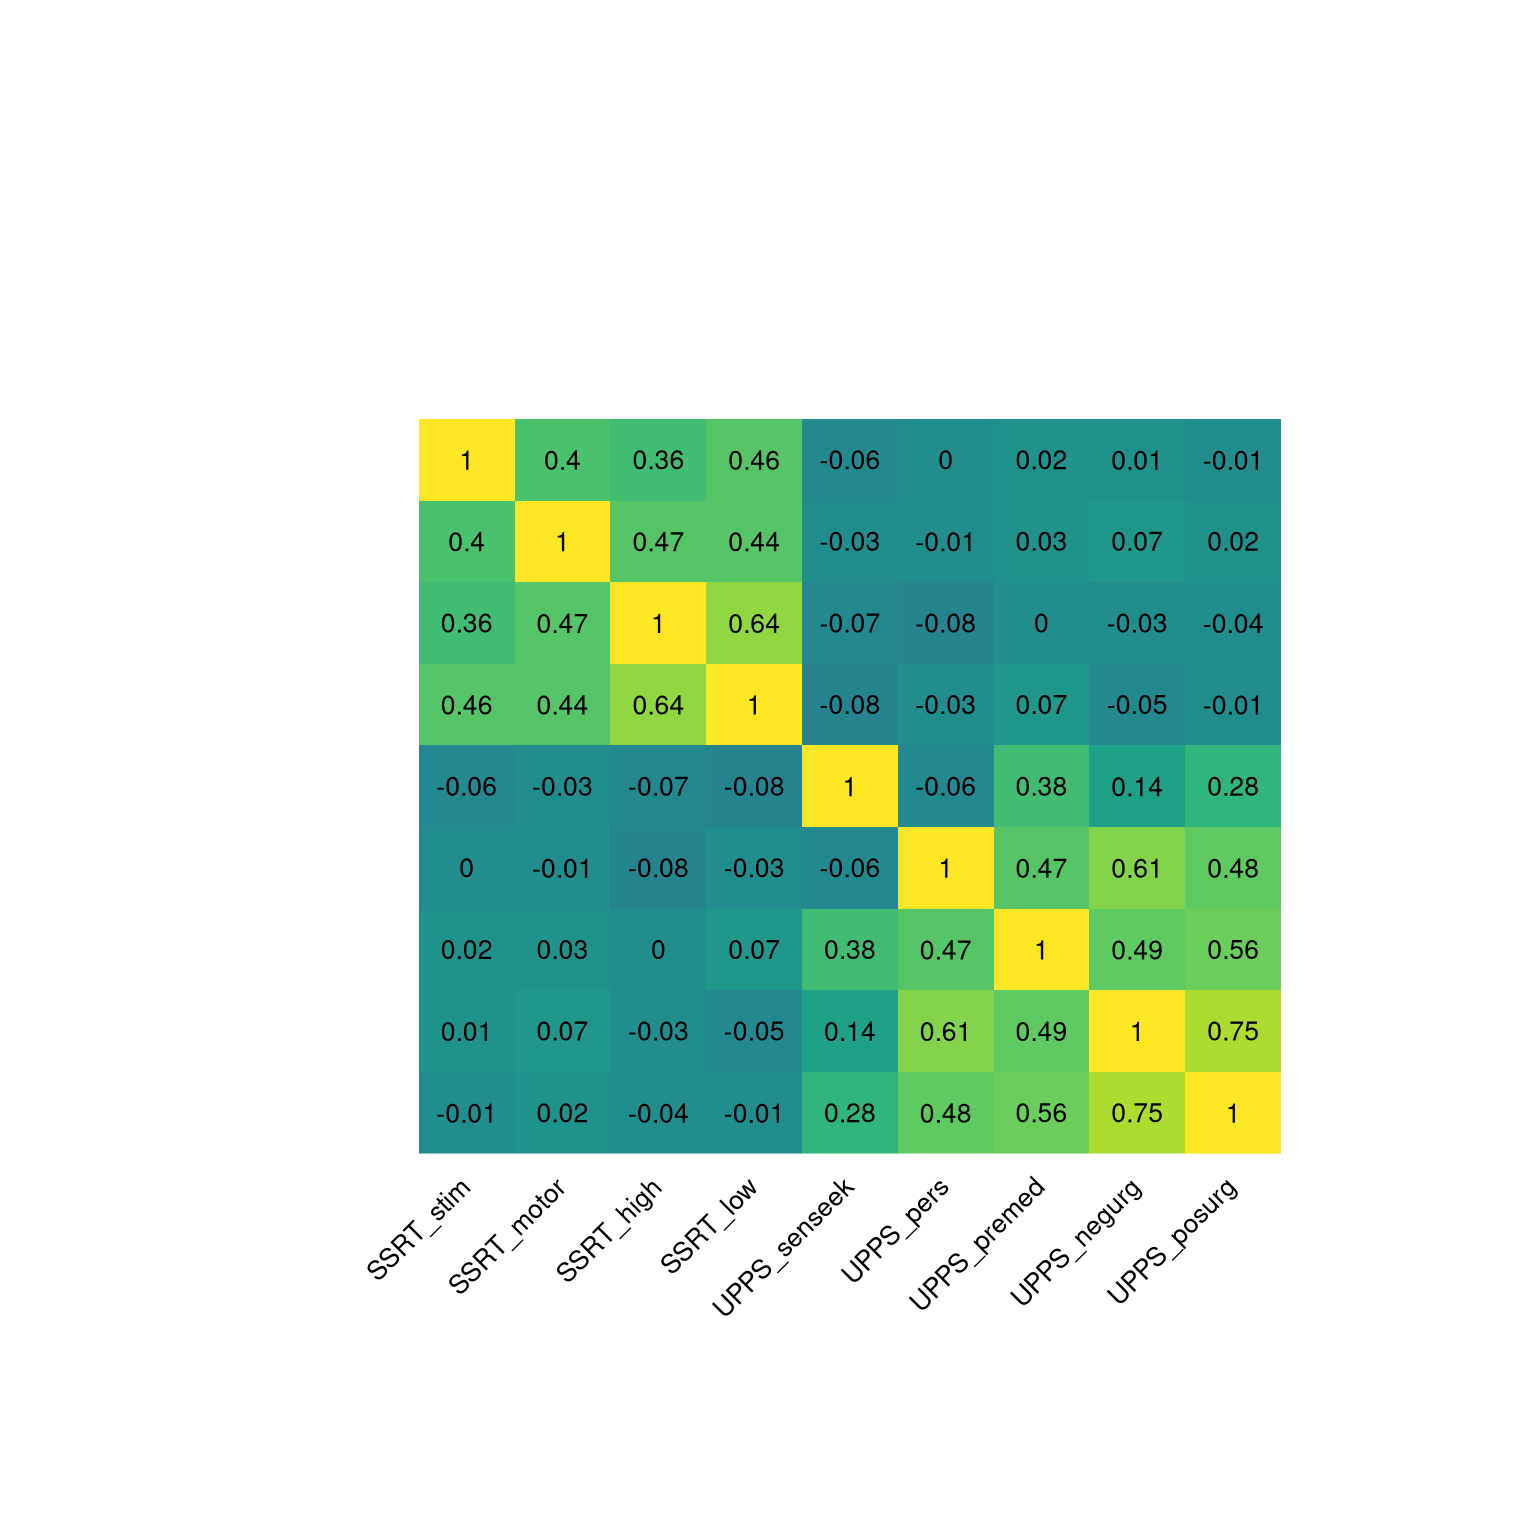 Heatmap of the correlation matrix for the nine self-control variables.  The brighter yellow areas in the top left and bottom right highlight the higher correlations within the two subsets of variables.